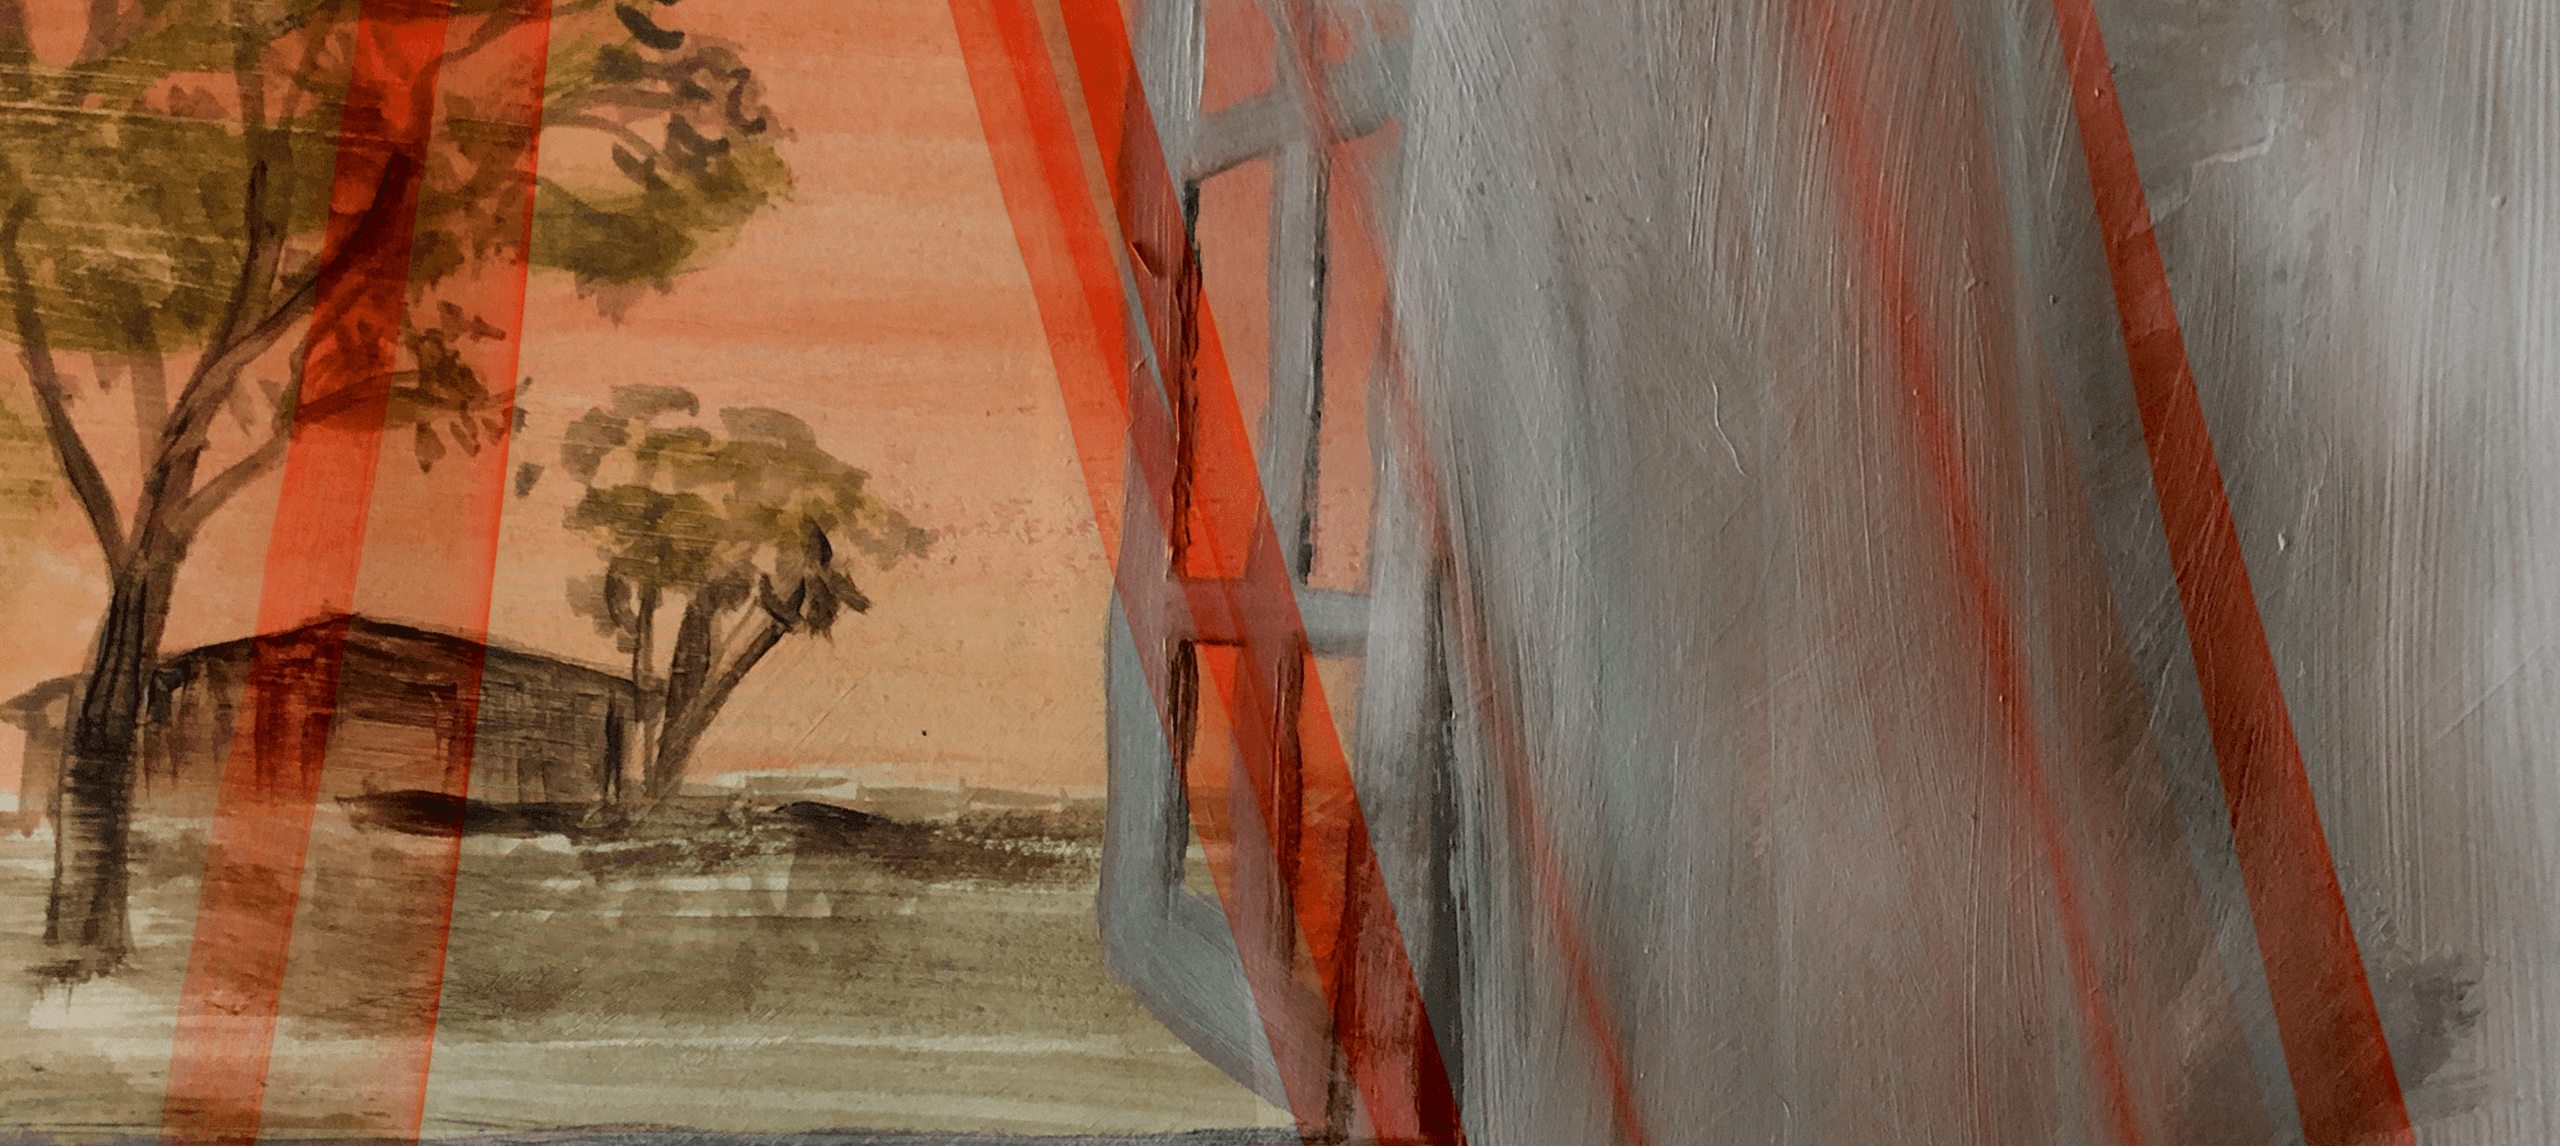 Abstract painting small house in field on far left with two bushy trees and some orange opaque stripes and orange sky